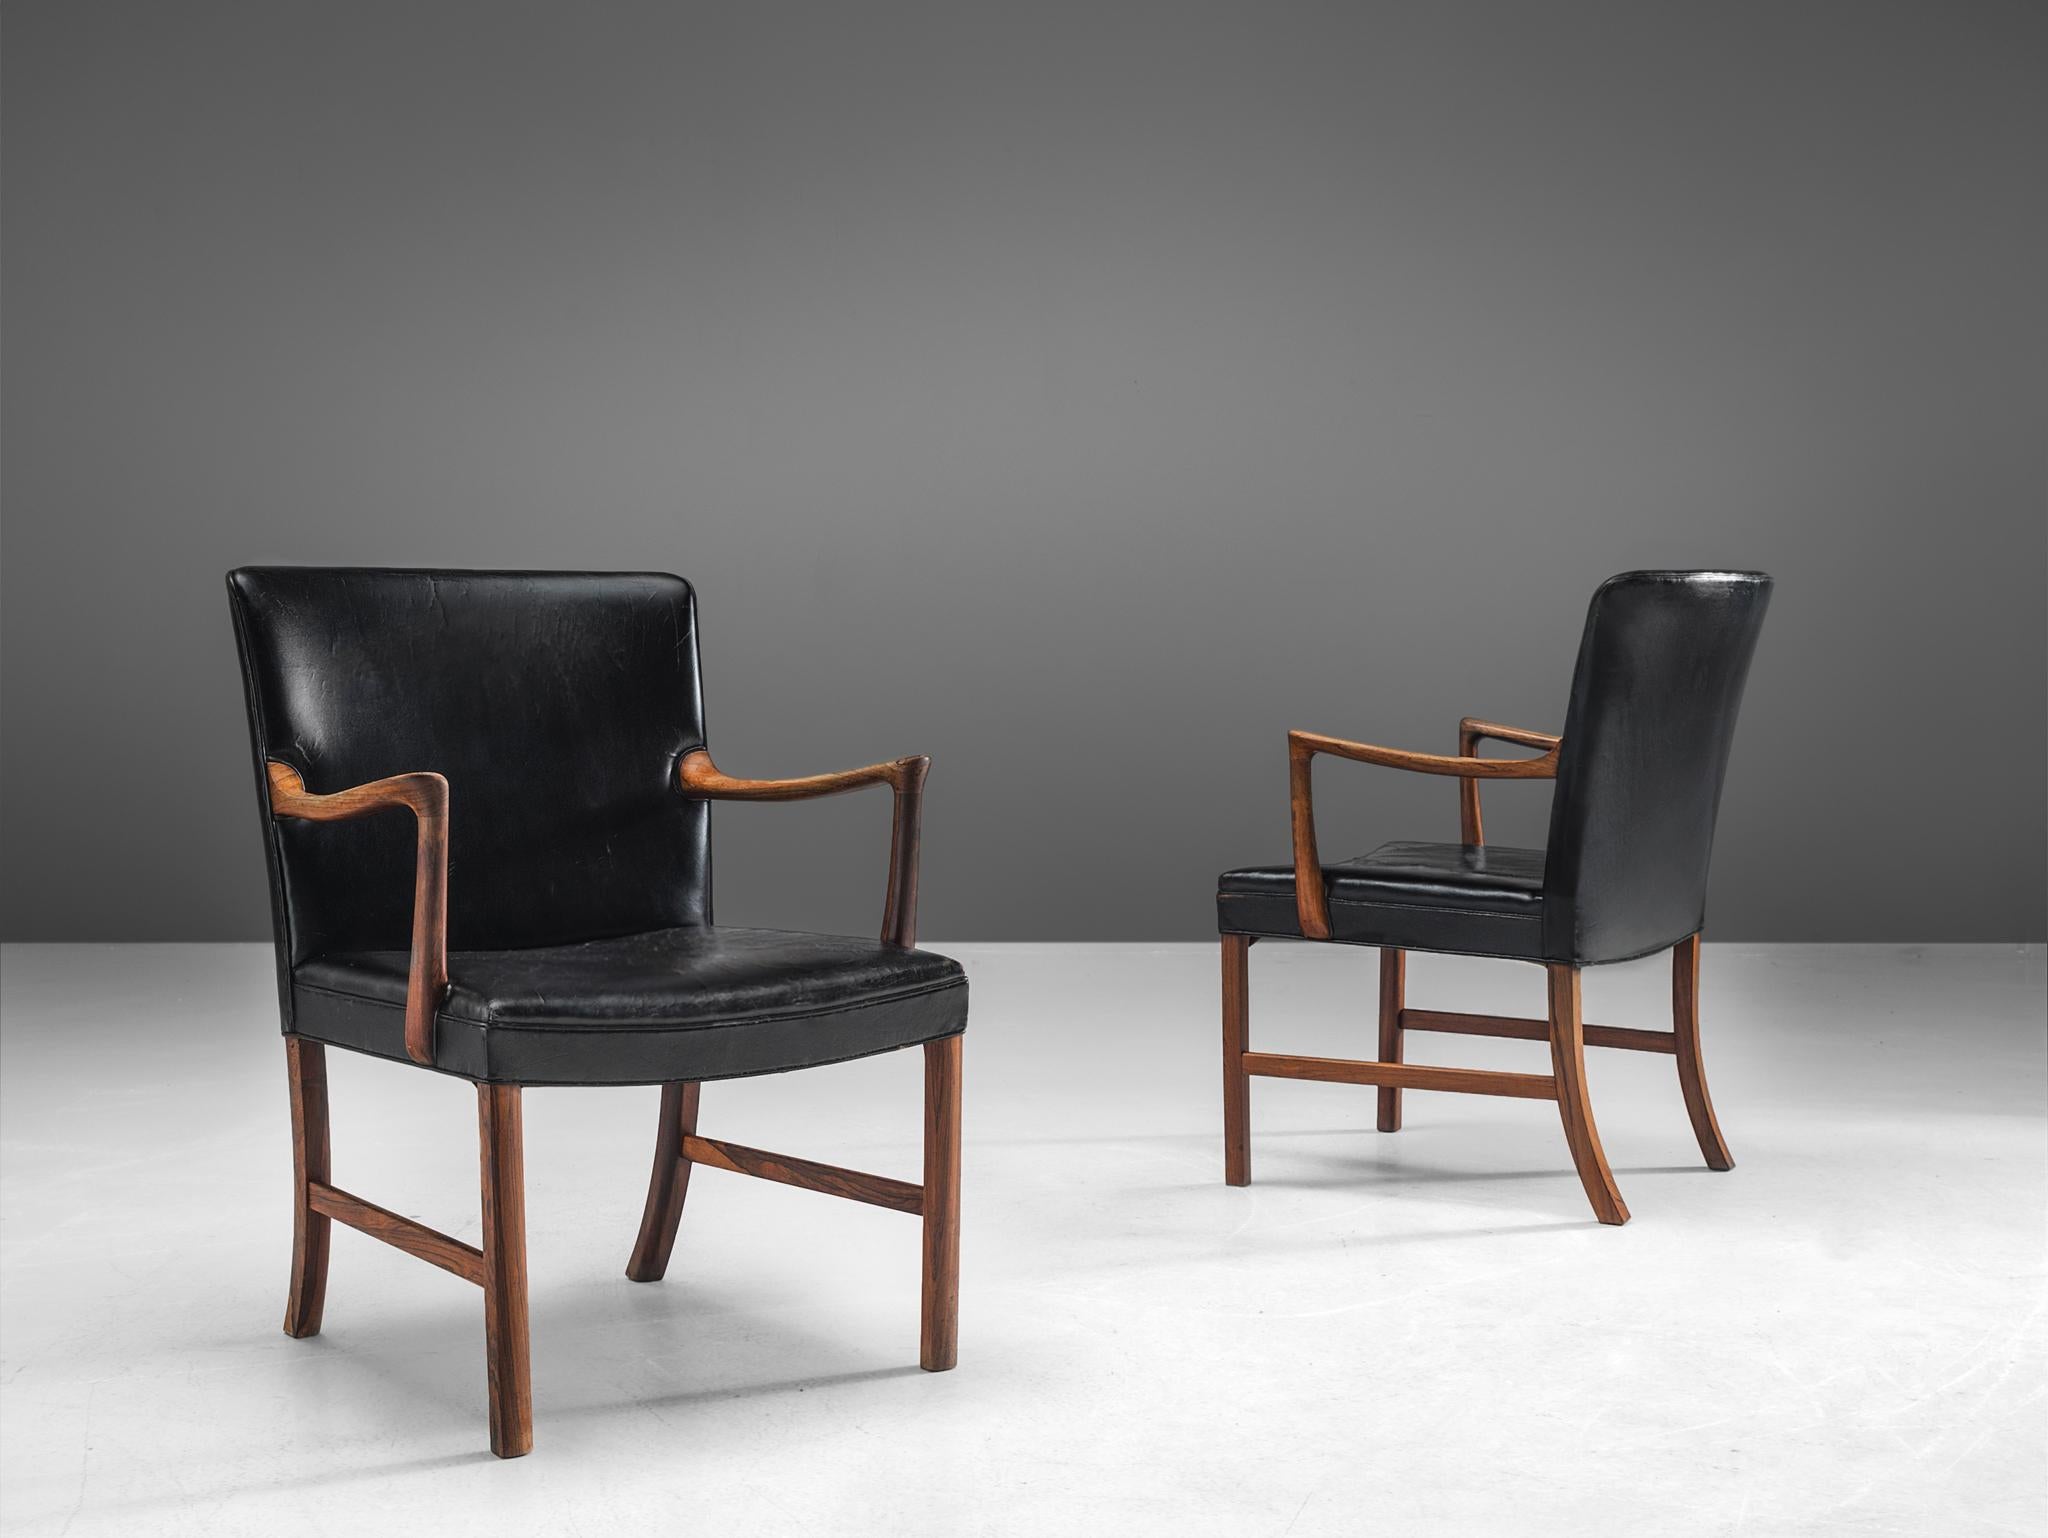 Ole Wanscher, two armchairs, armchairs, in rosewood and leather, Denmark, 1950s. 

This set of elegant easy chair in cognac leather and rosewood are designed by the Danish designer Ole Wanscher. The chairs are wide and highly comfortable. A true